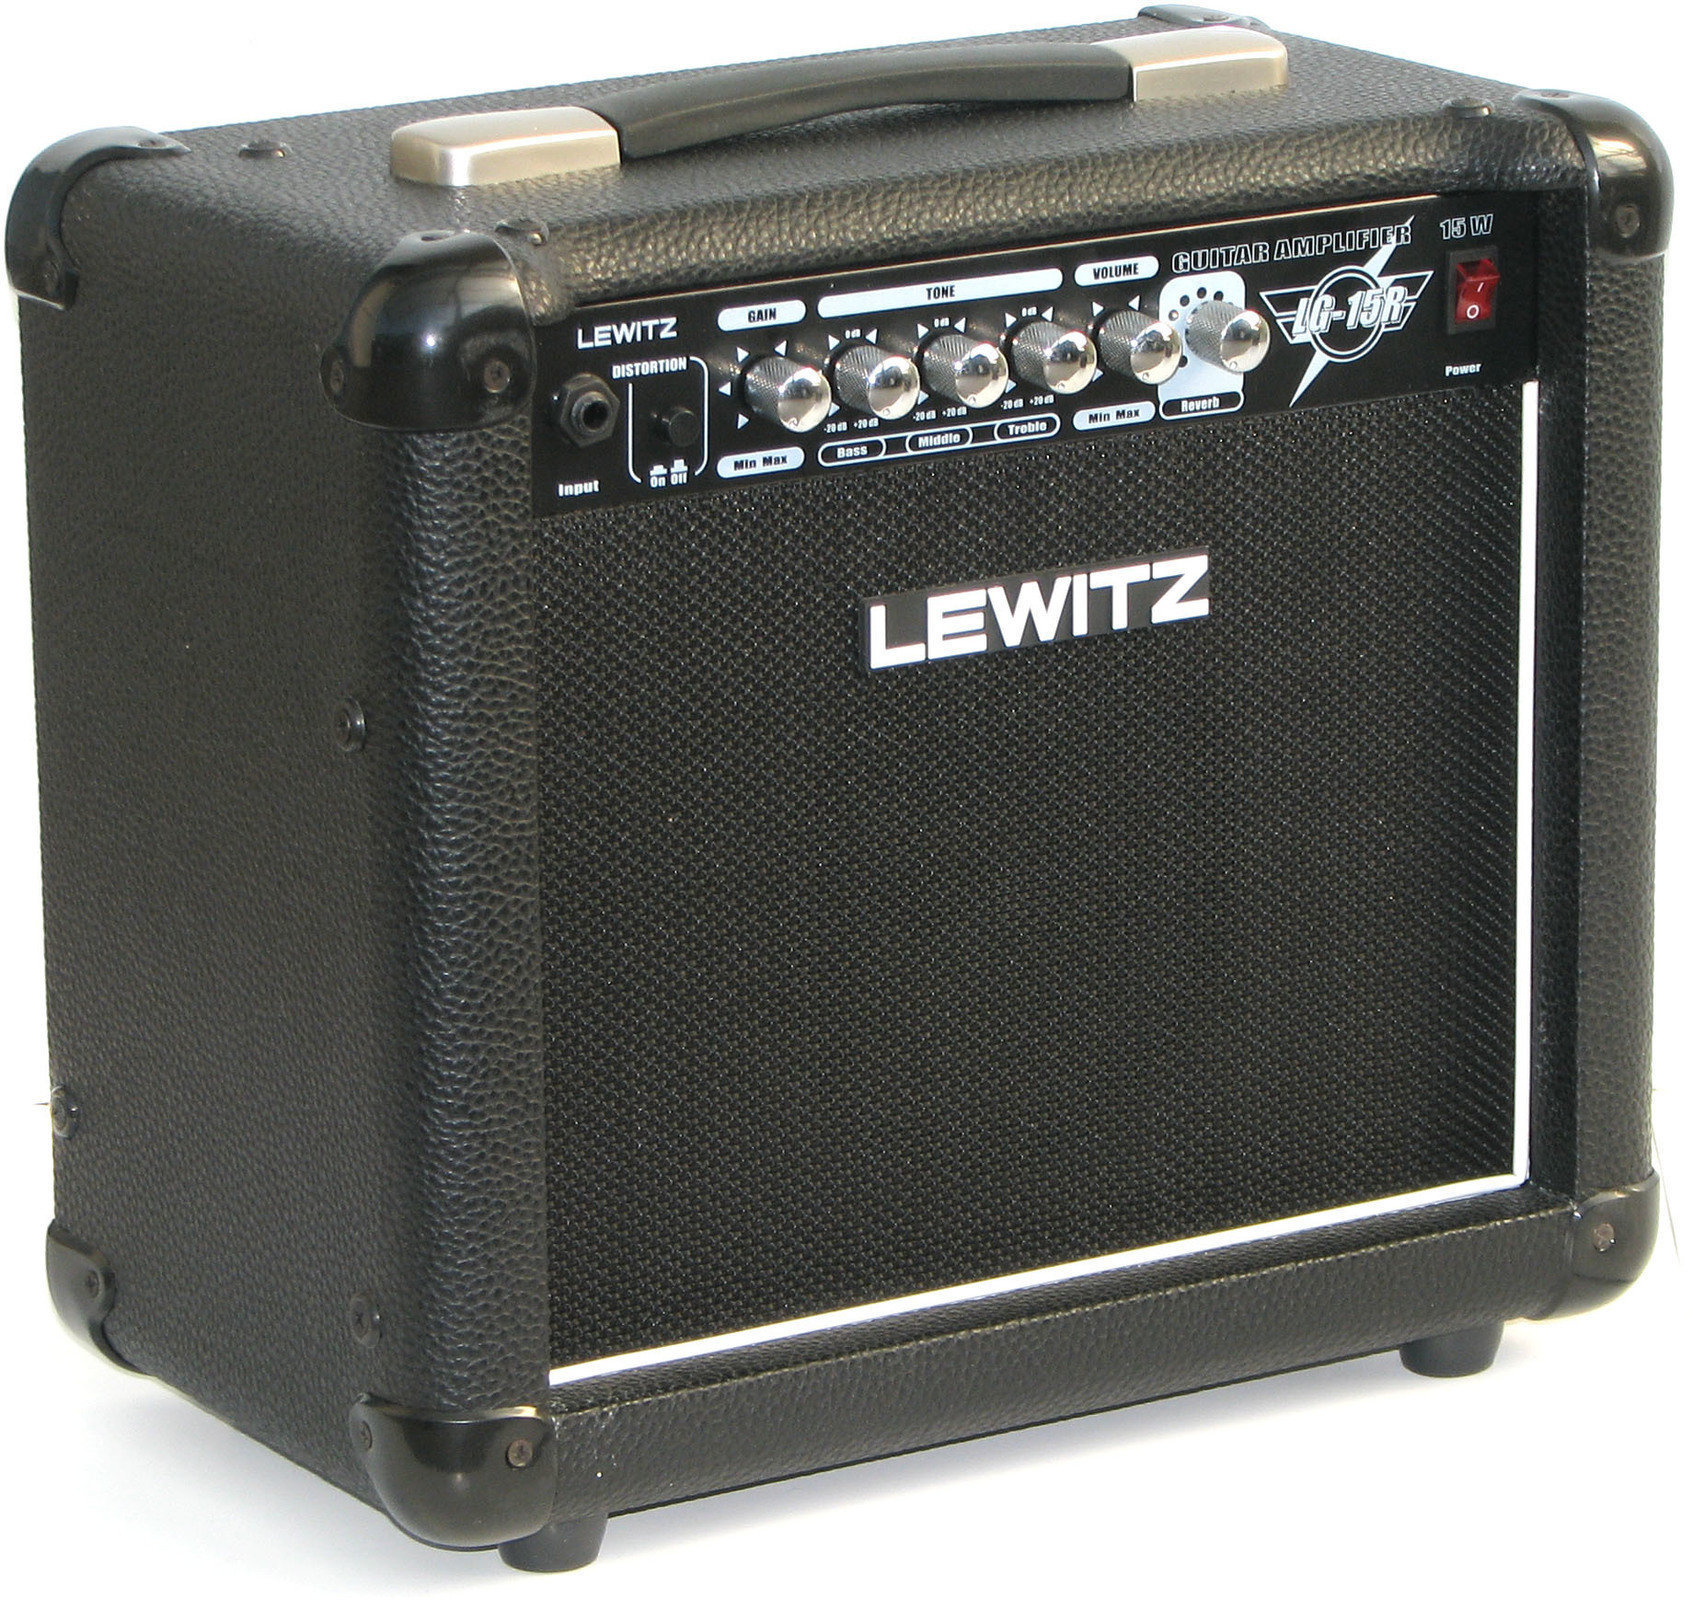 Solid-State Combo Lewitz LG 15 R